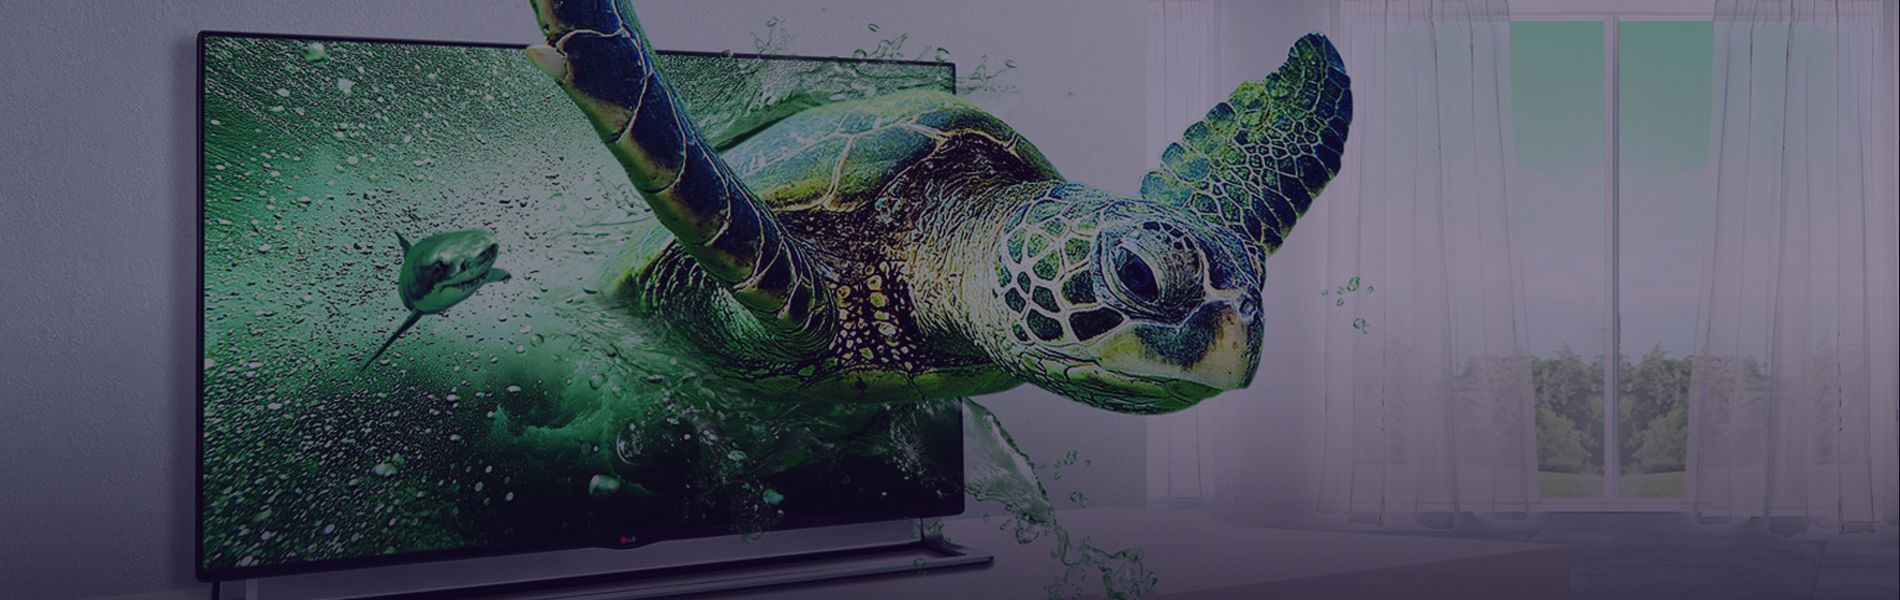 Are 3D TV's on the Decline?